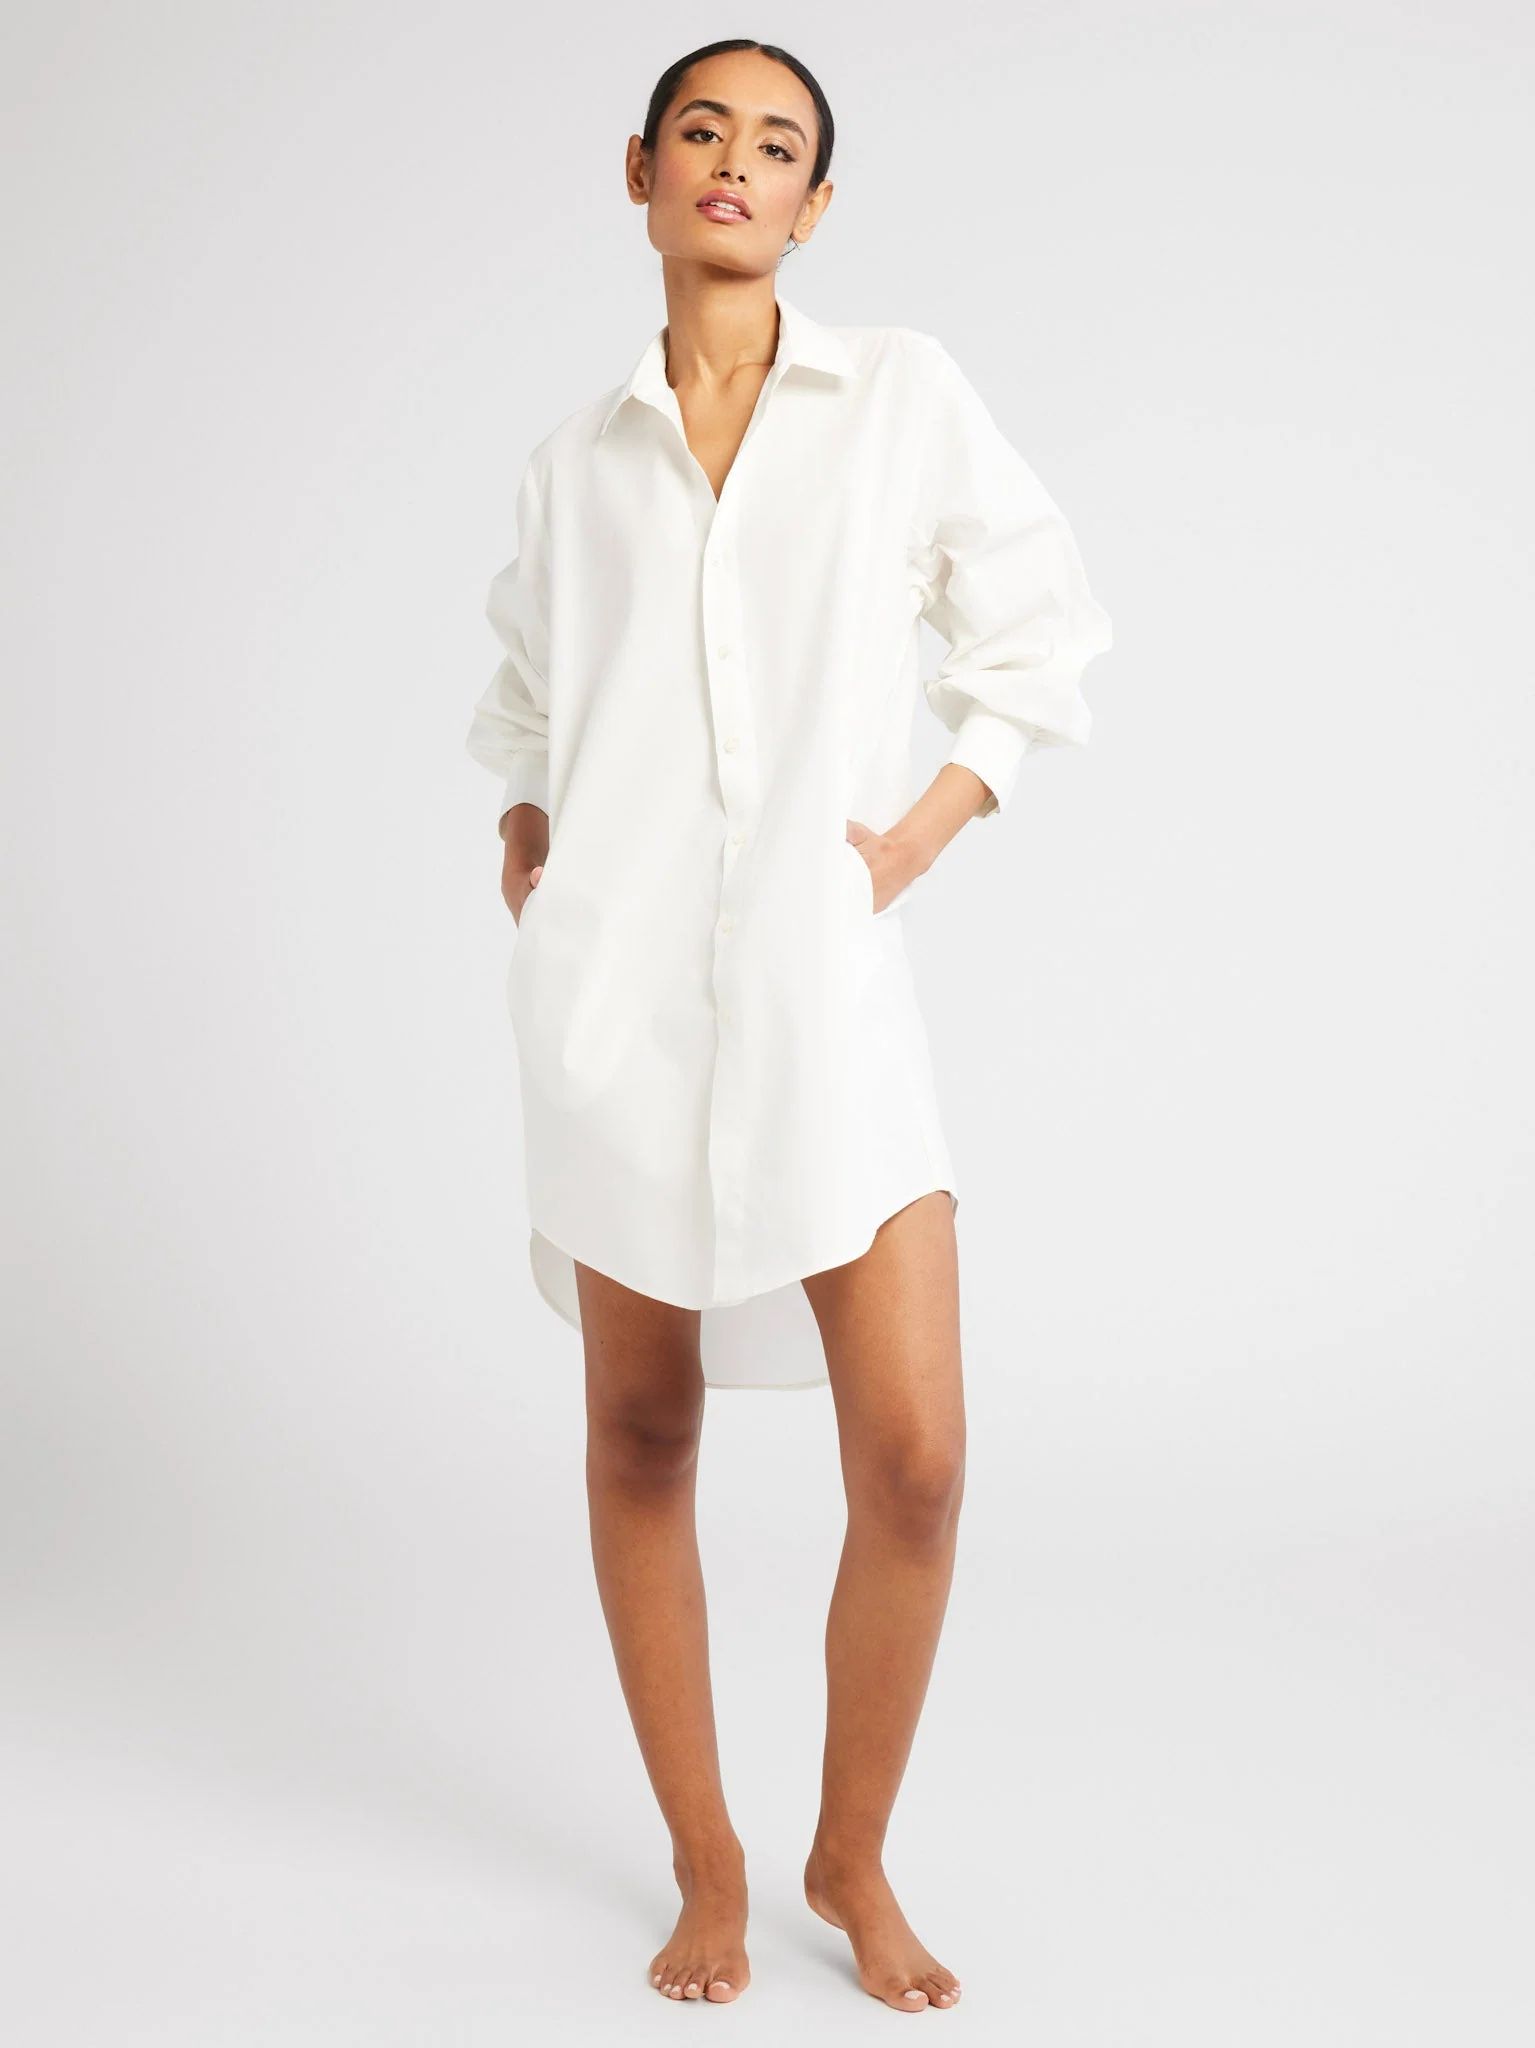 Shop Mille - Holly Mini Dress in White | Mille